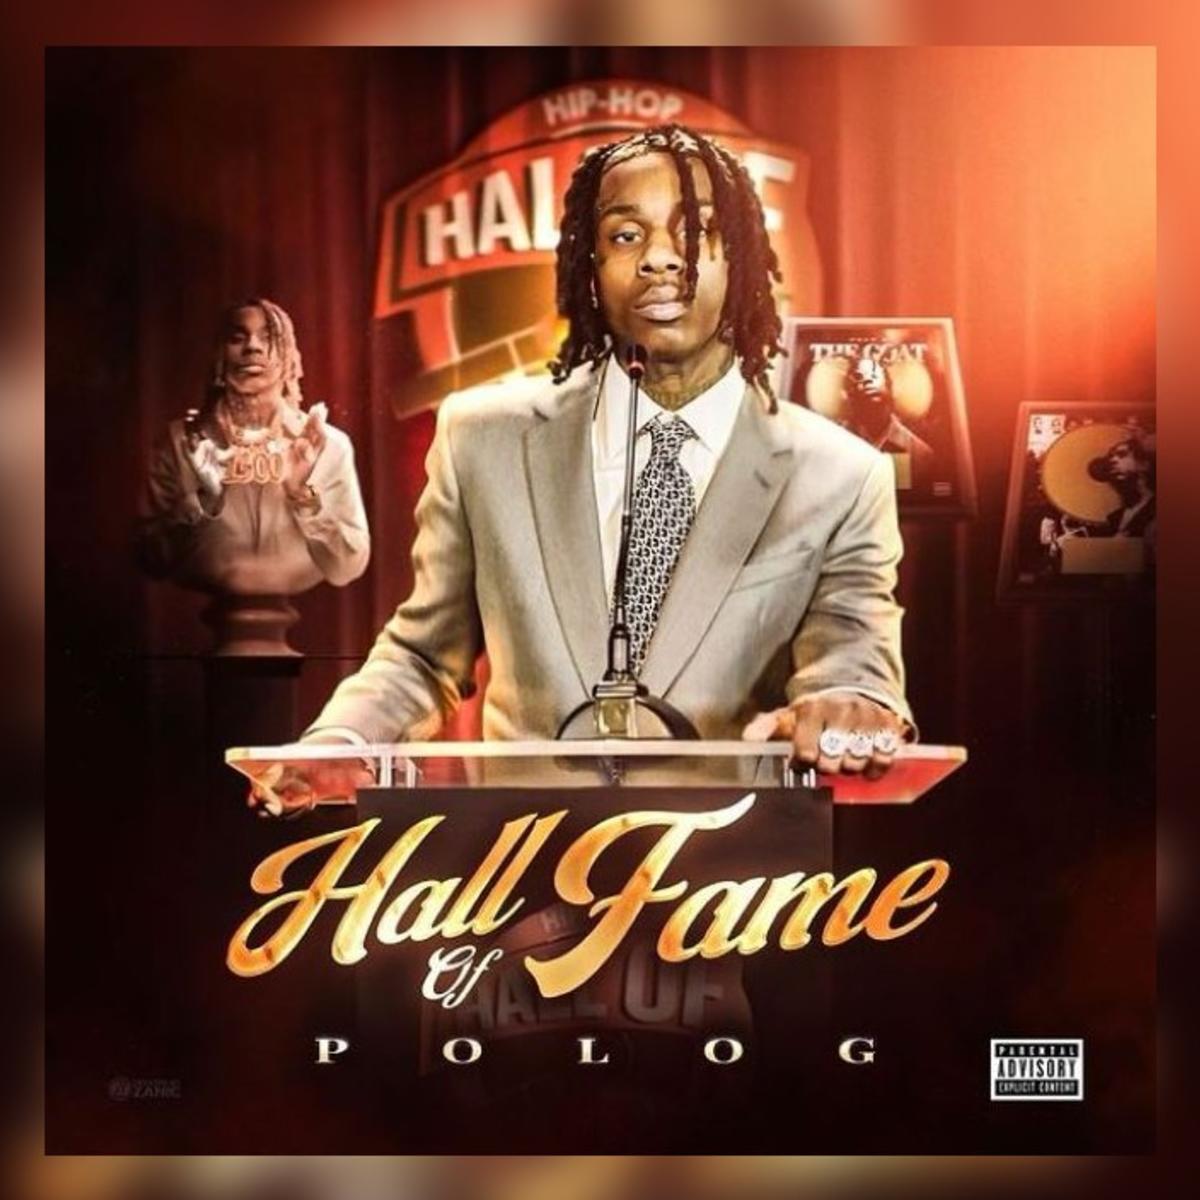 Polo G – Hall Of Fame (Album Review)